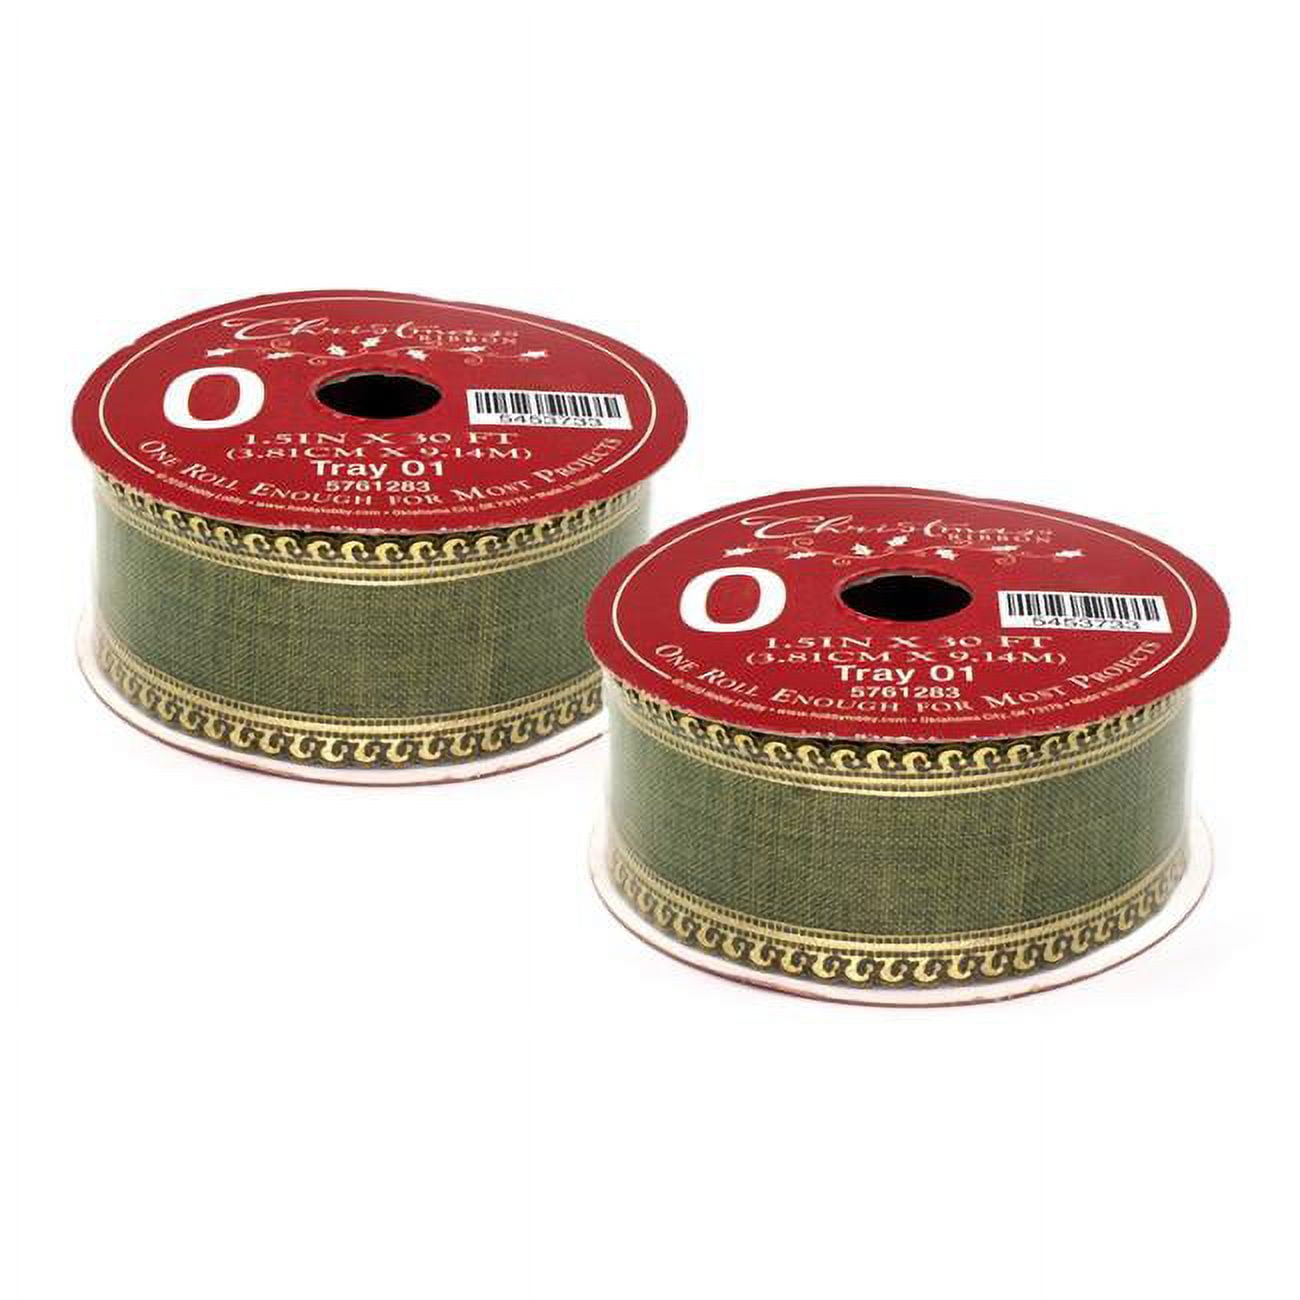 Offray Ribbon, Red 1 1/2 inch Wired Edge Metallic Ribbon, 9 feet 